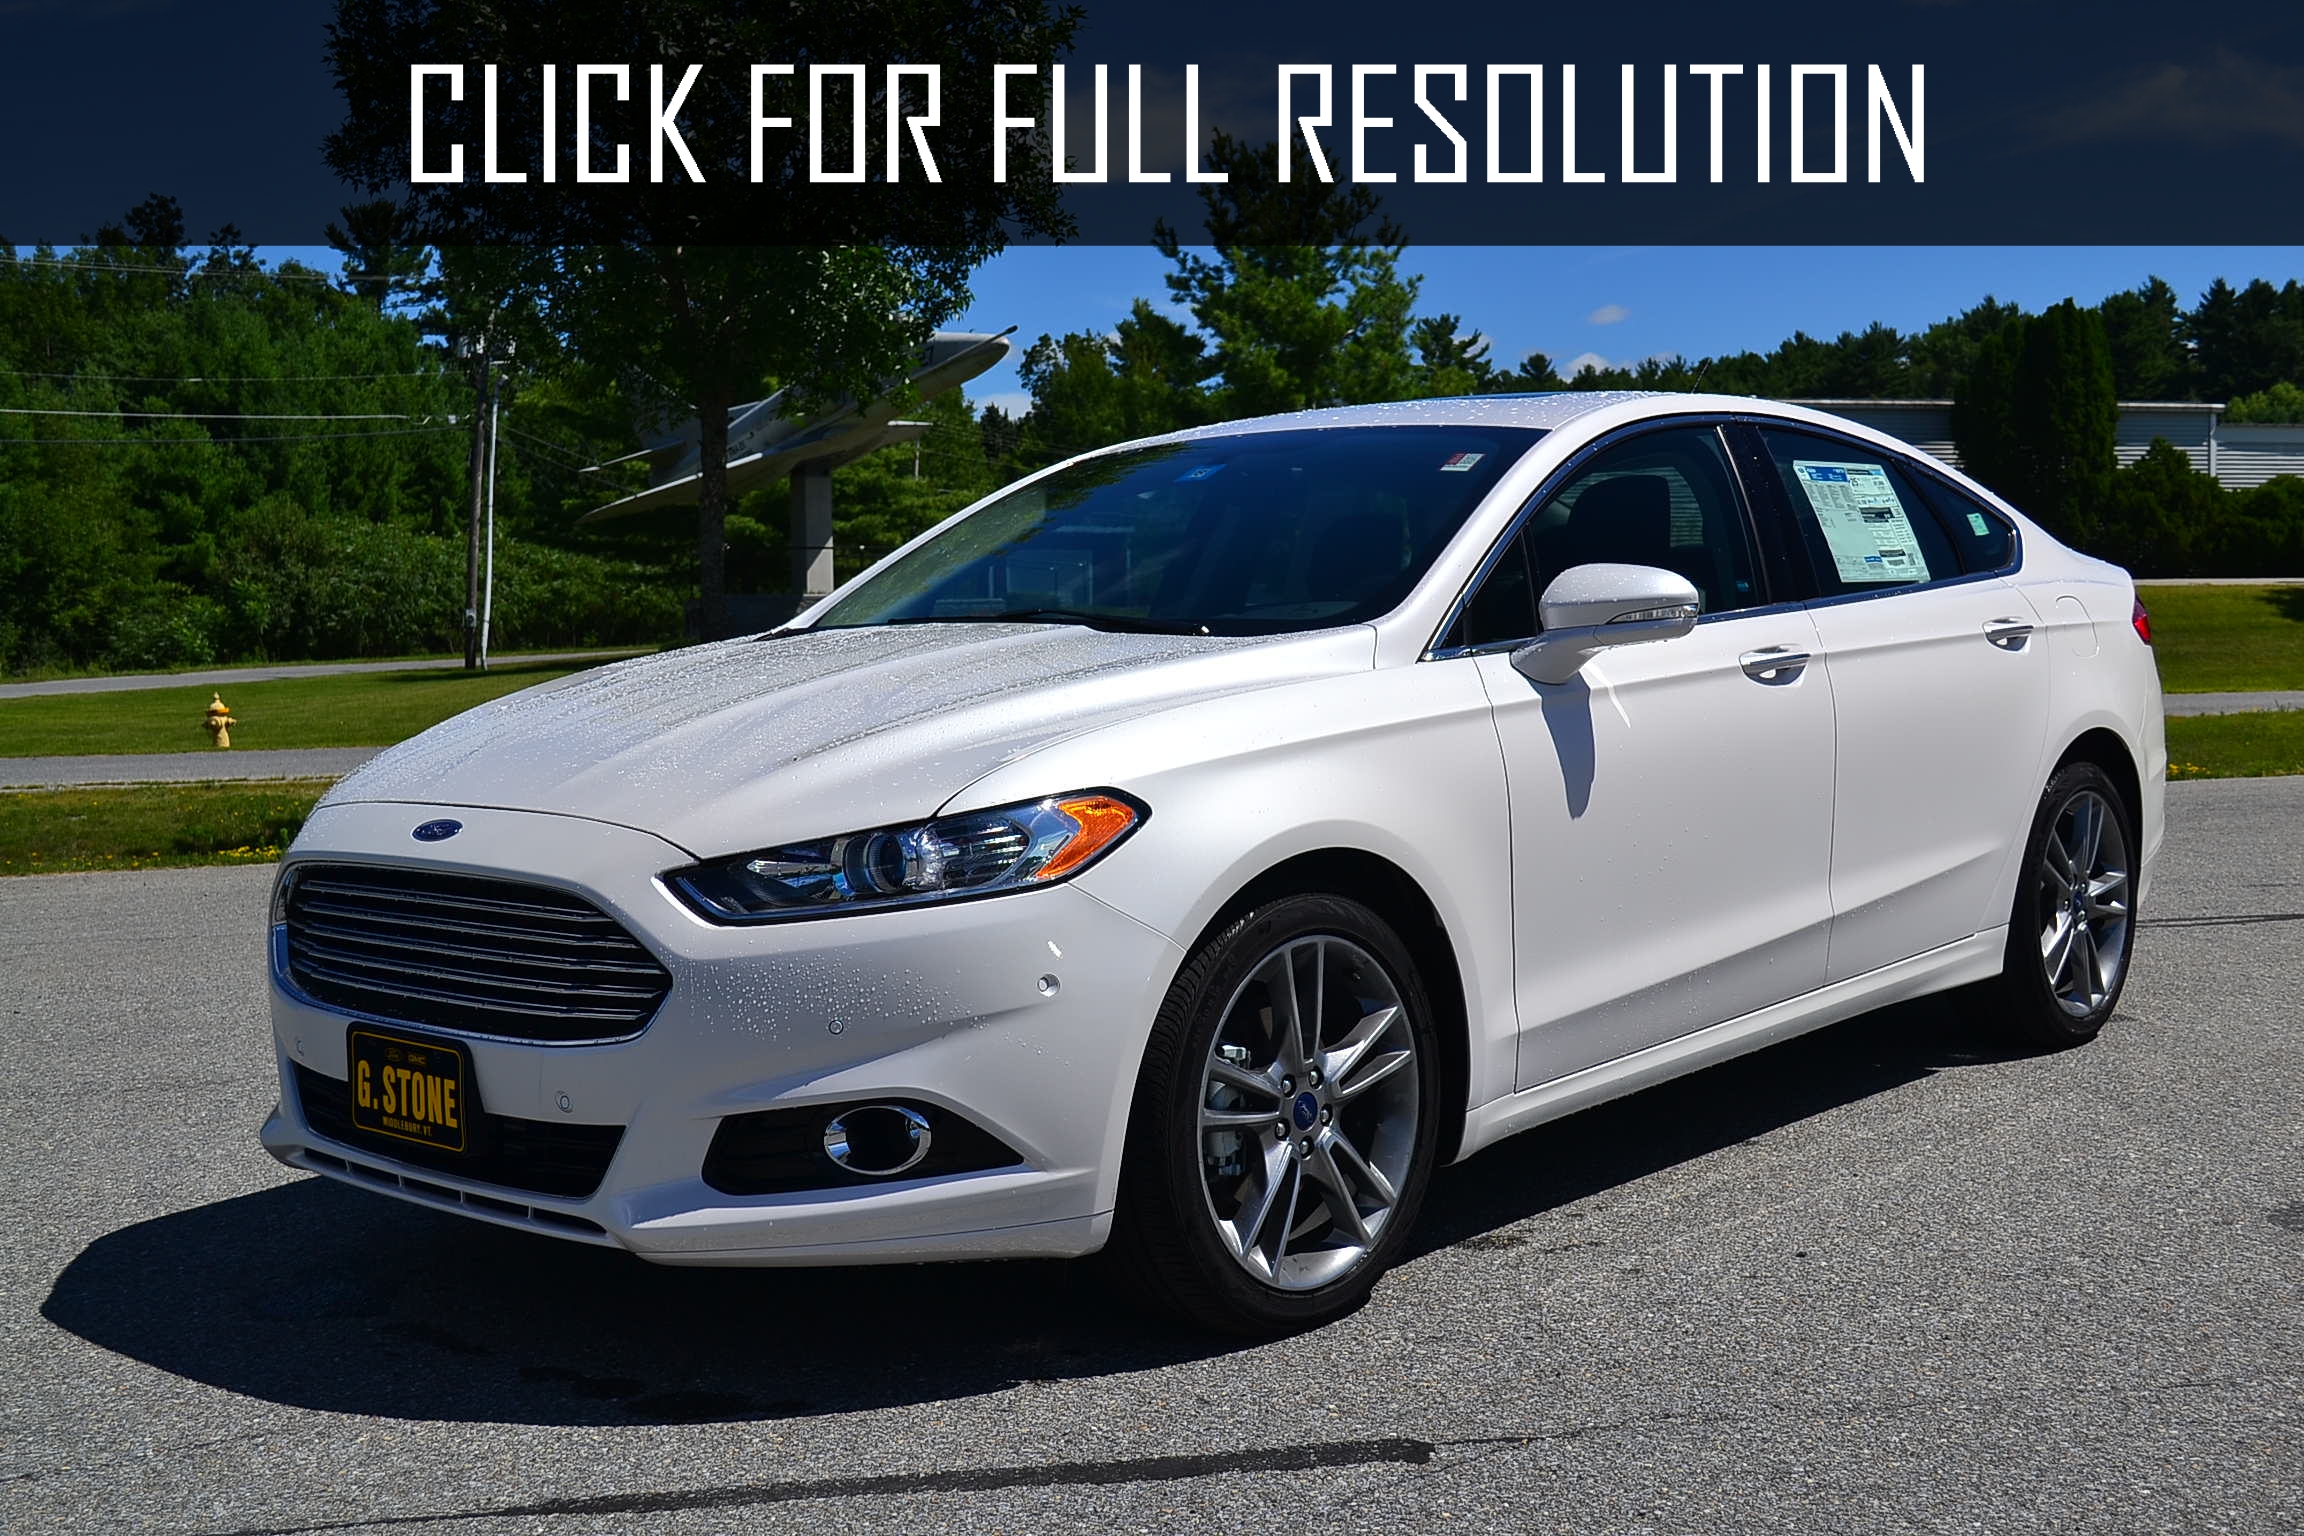 Ford Fusion 2015 Models